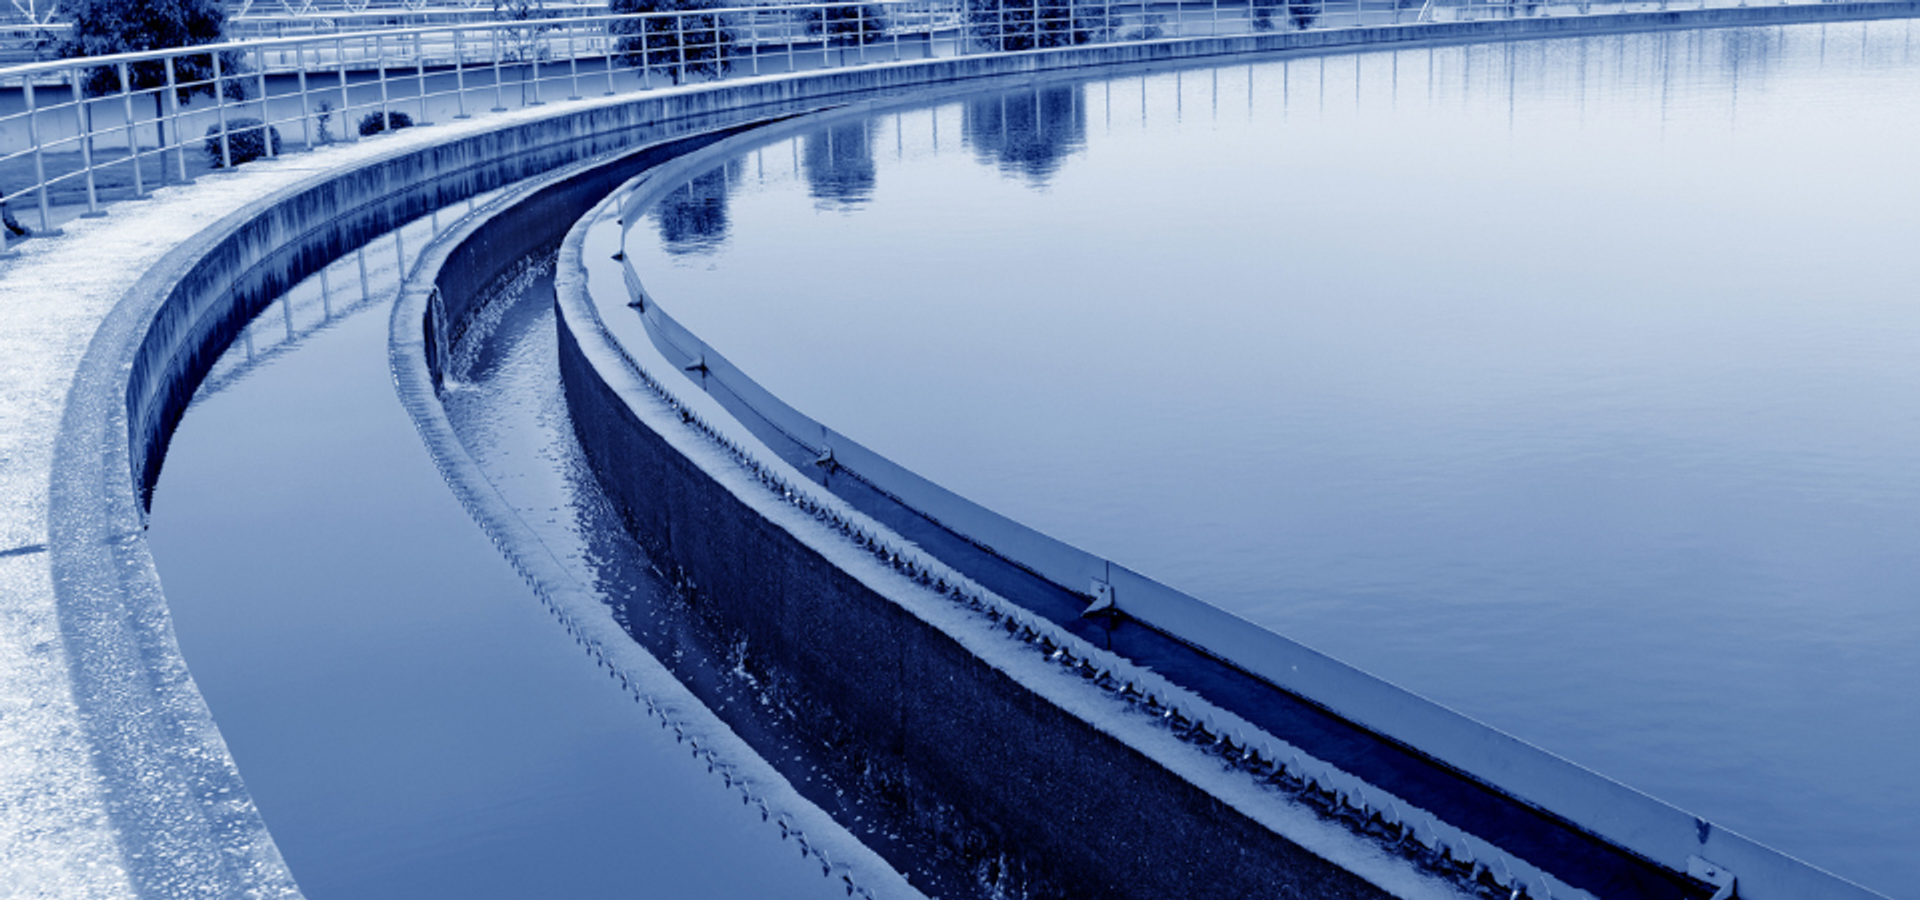 Water Pollution, Part 2: Household Wastewater Treatment